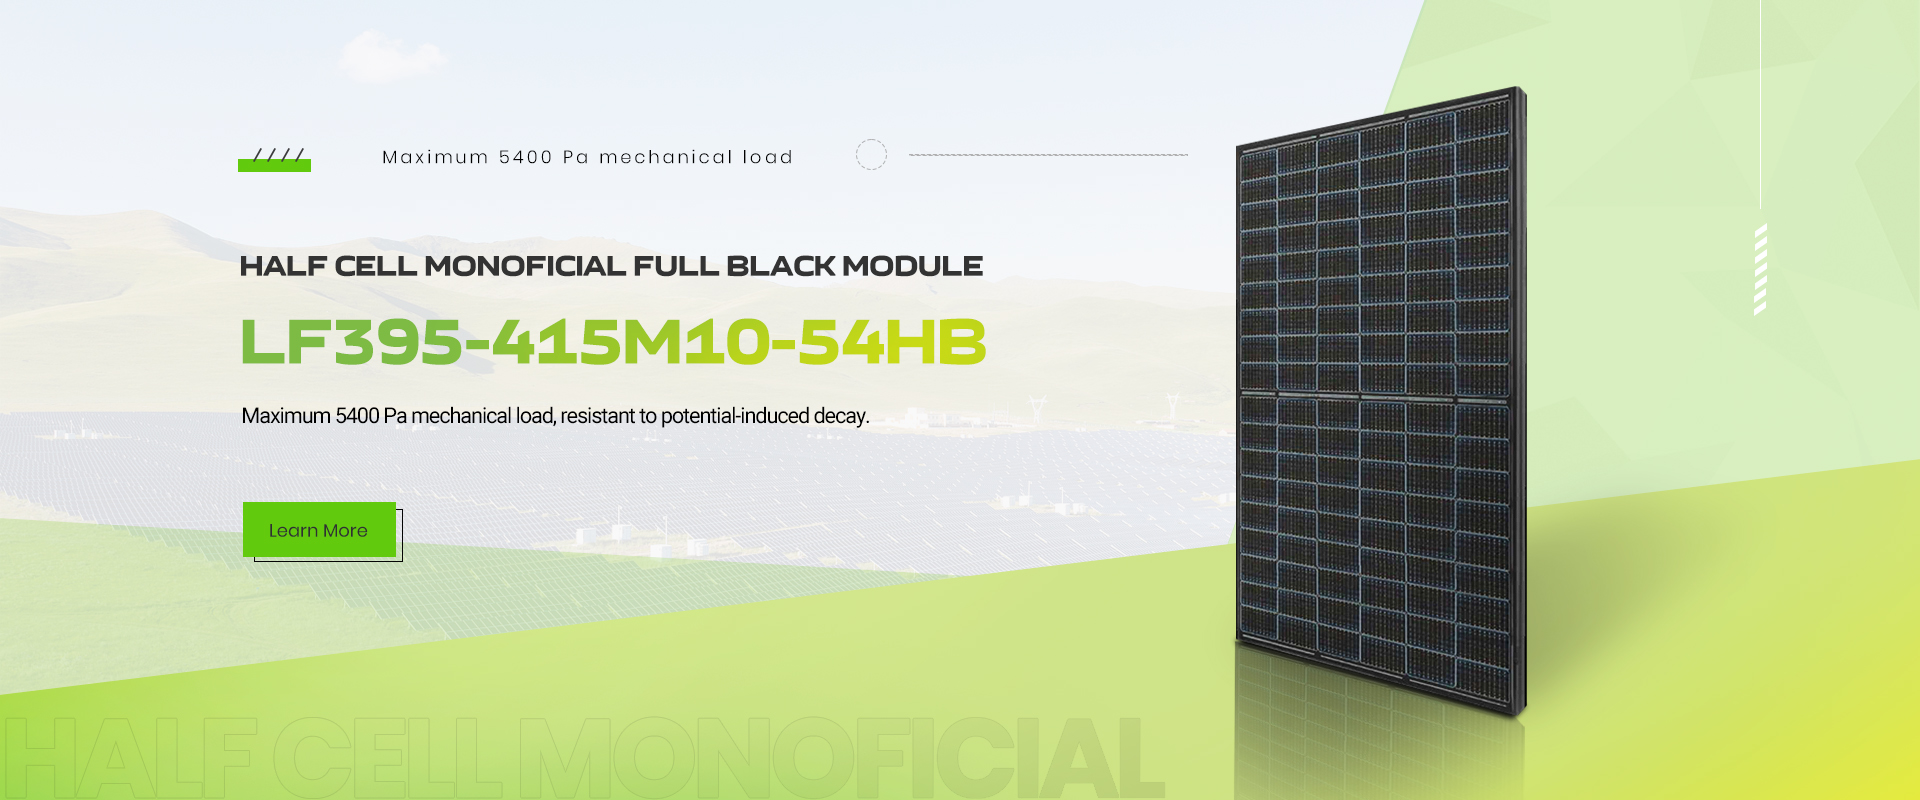 lefeng-weatherproof-high-efficiency-wholesale-grade-a-144-half-cell-monocrystalline-silicon-photovoltaic-module-tuv-certificated-440460w-166mm-black-solar-panel-pv-module-product